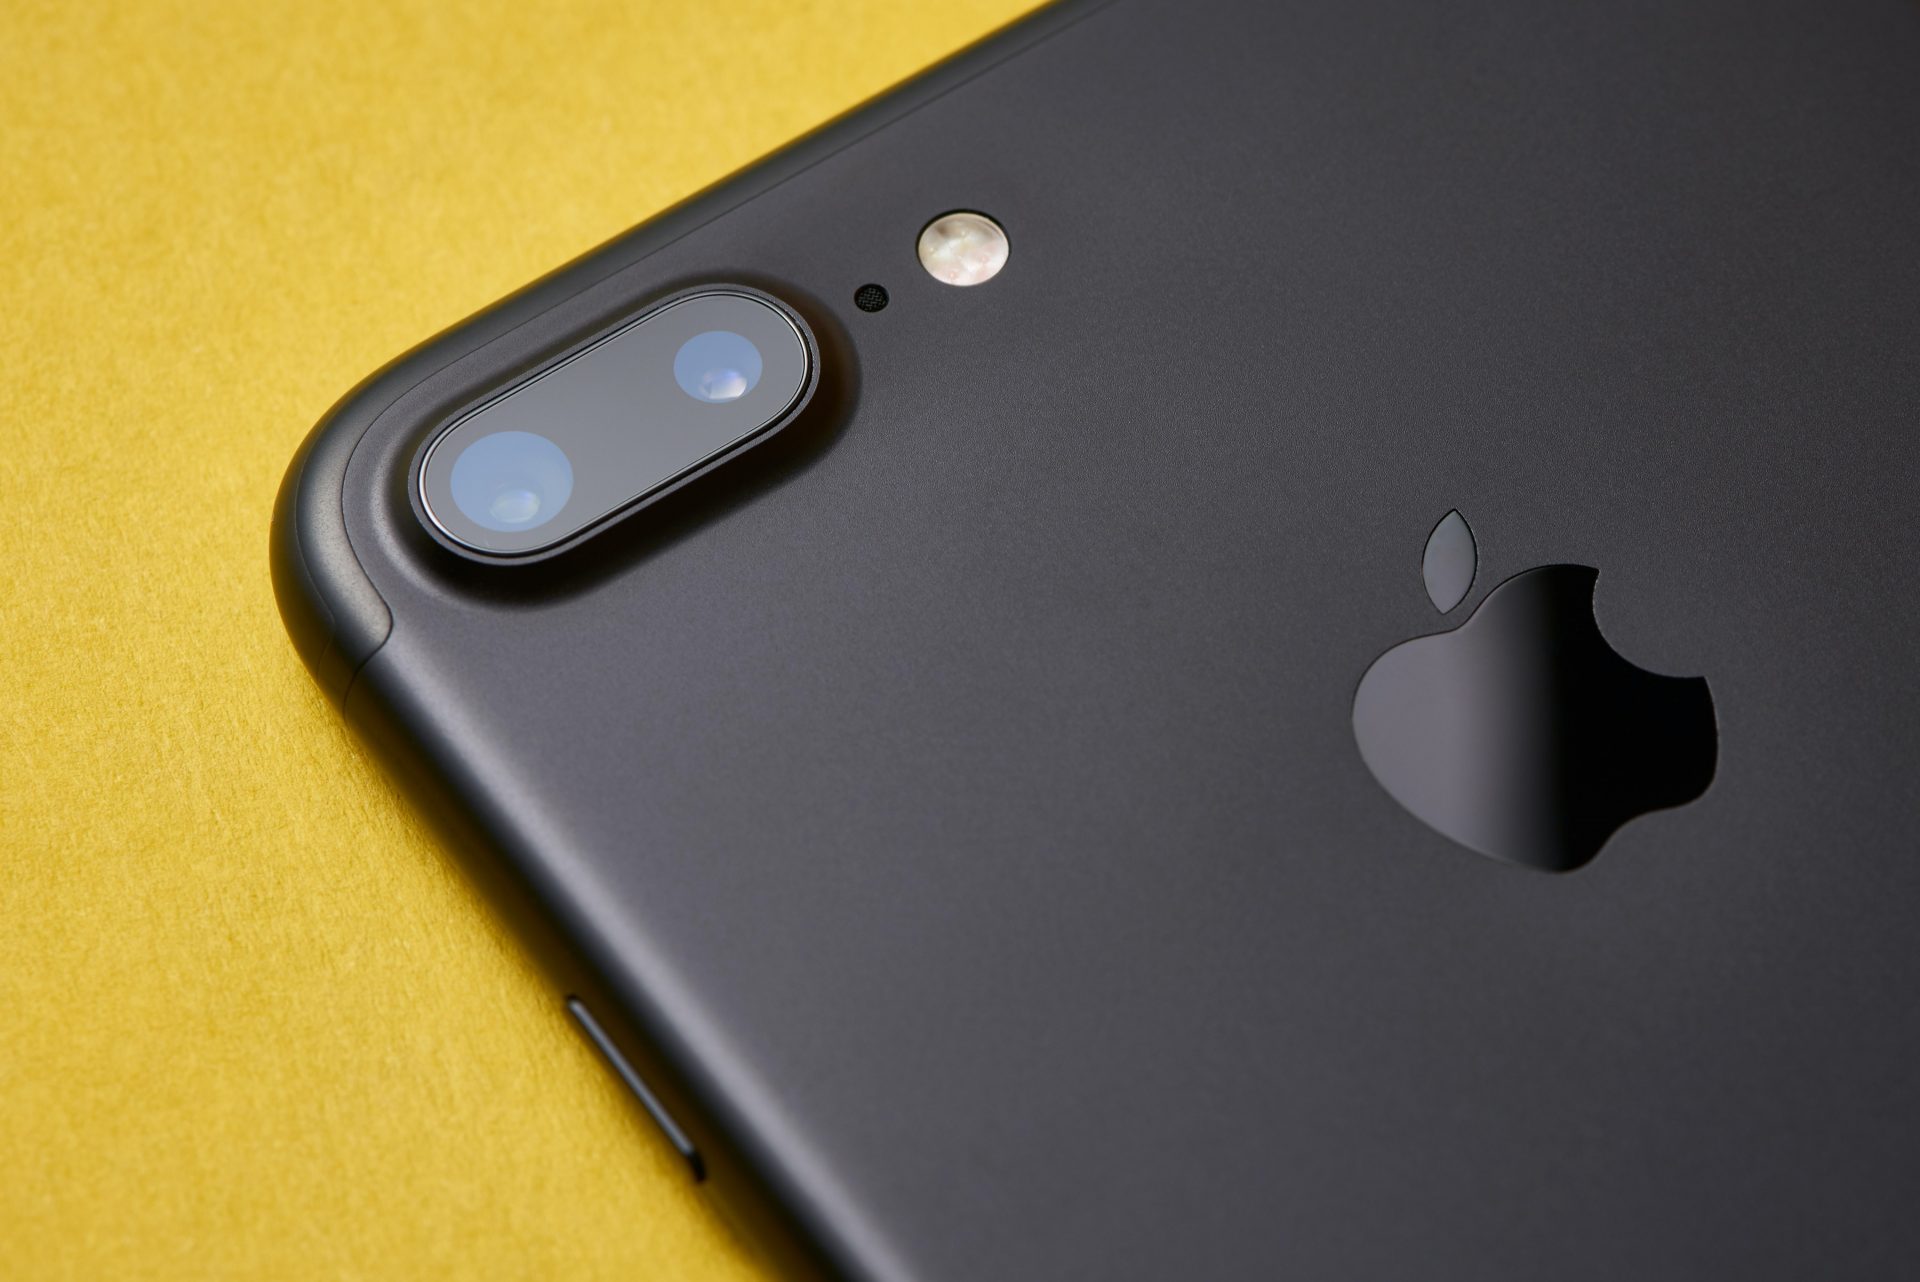 A photo of an iPhone on a yellow background